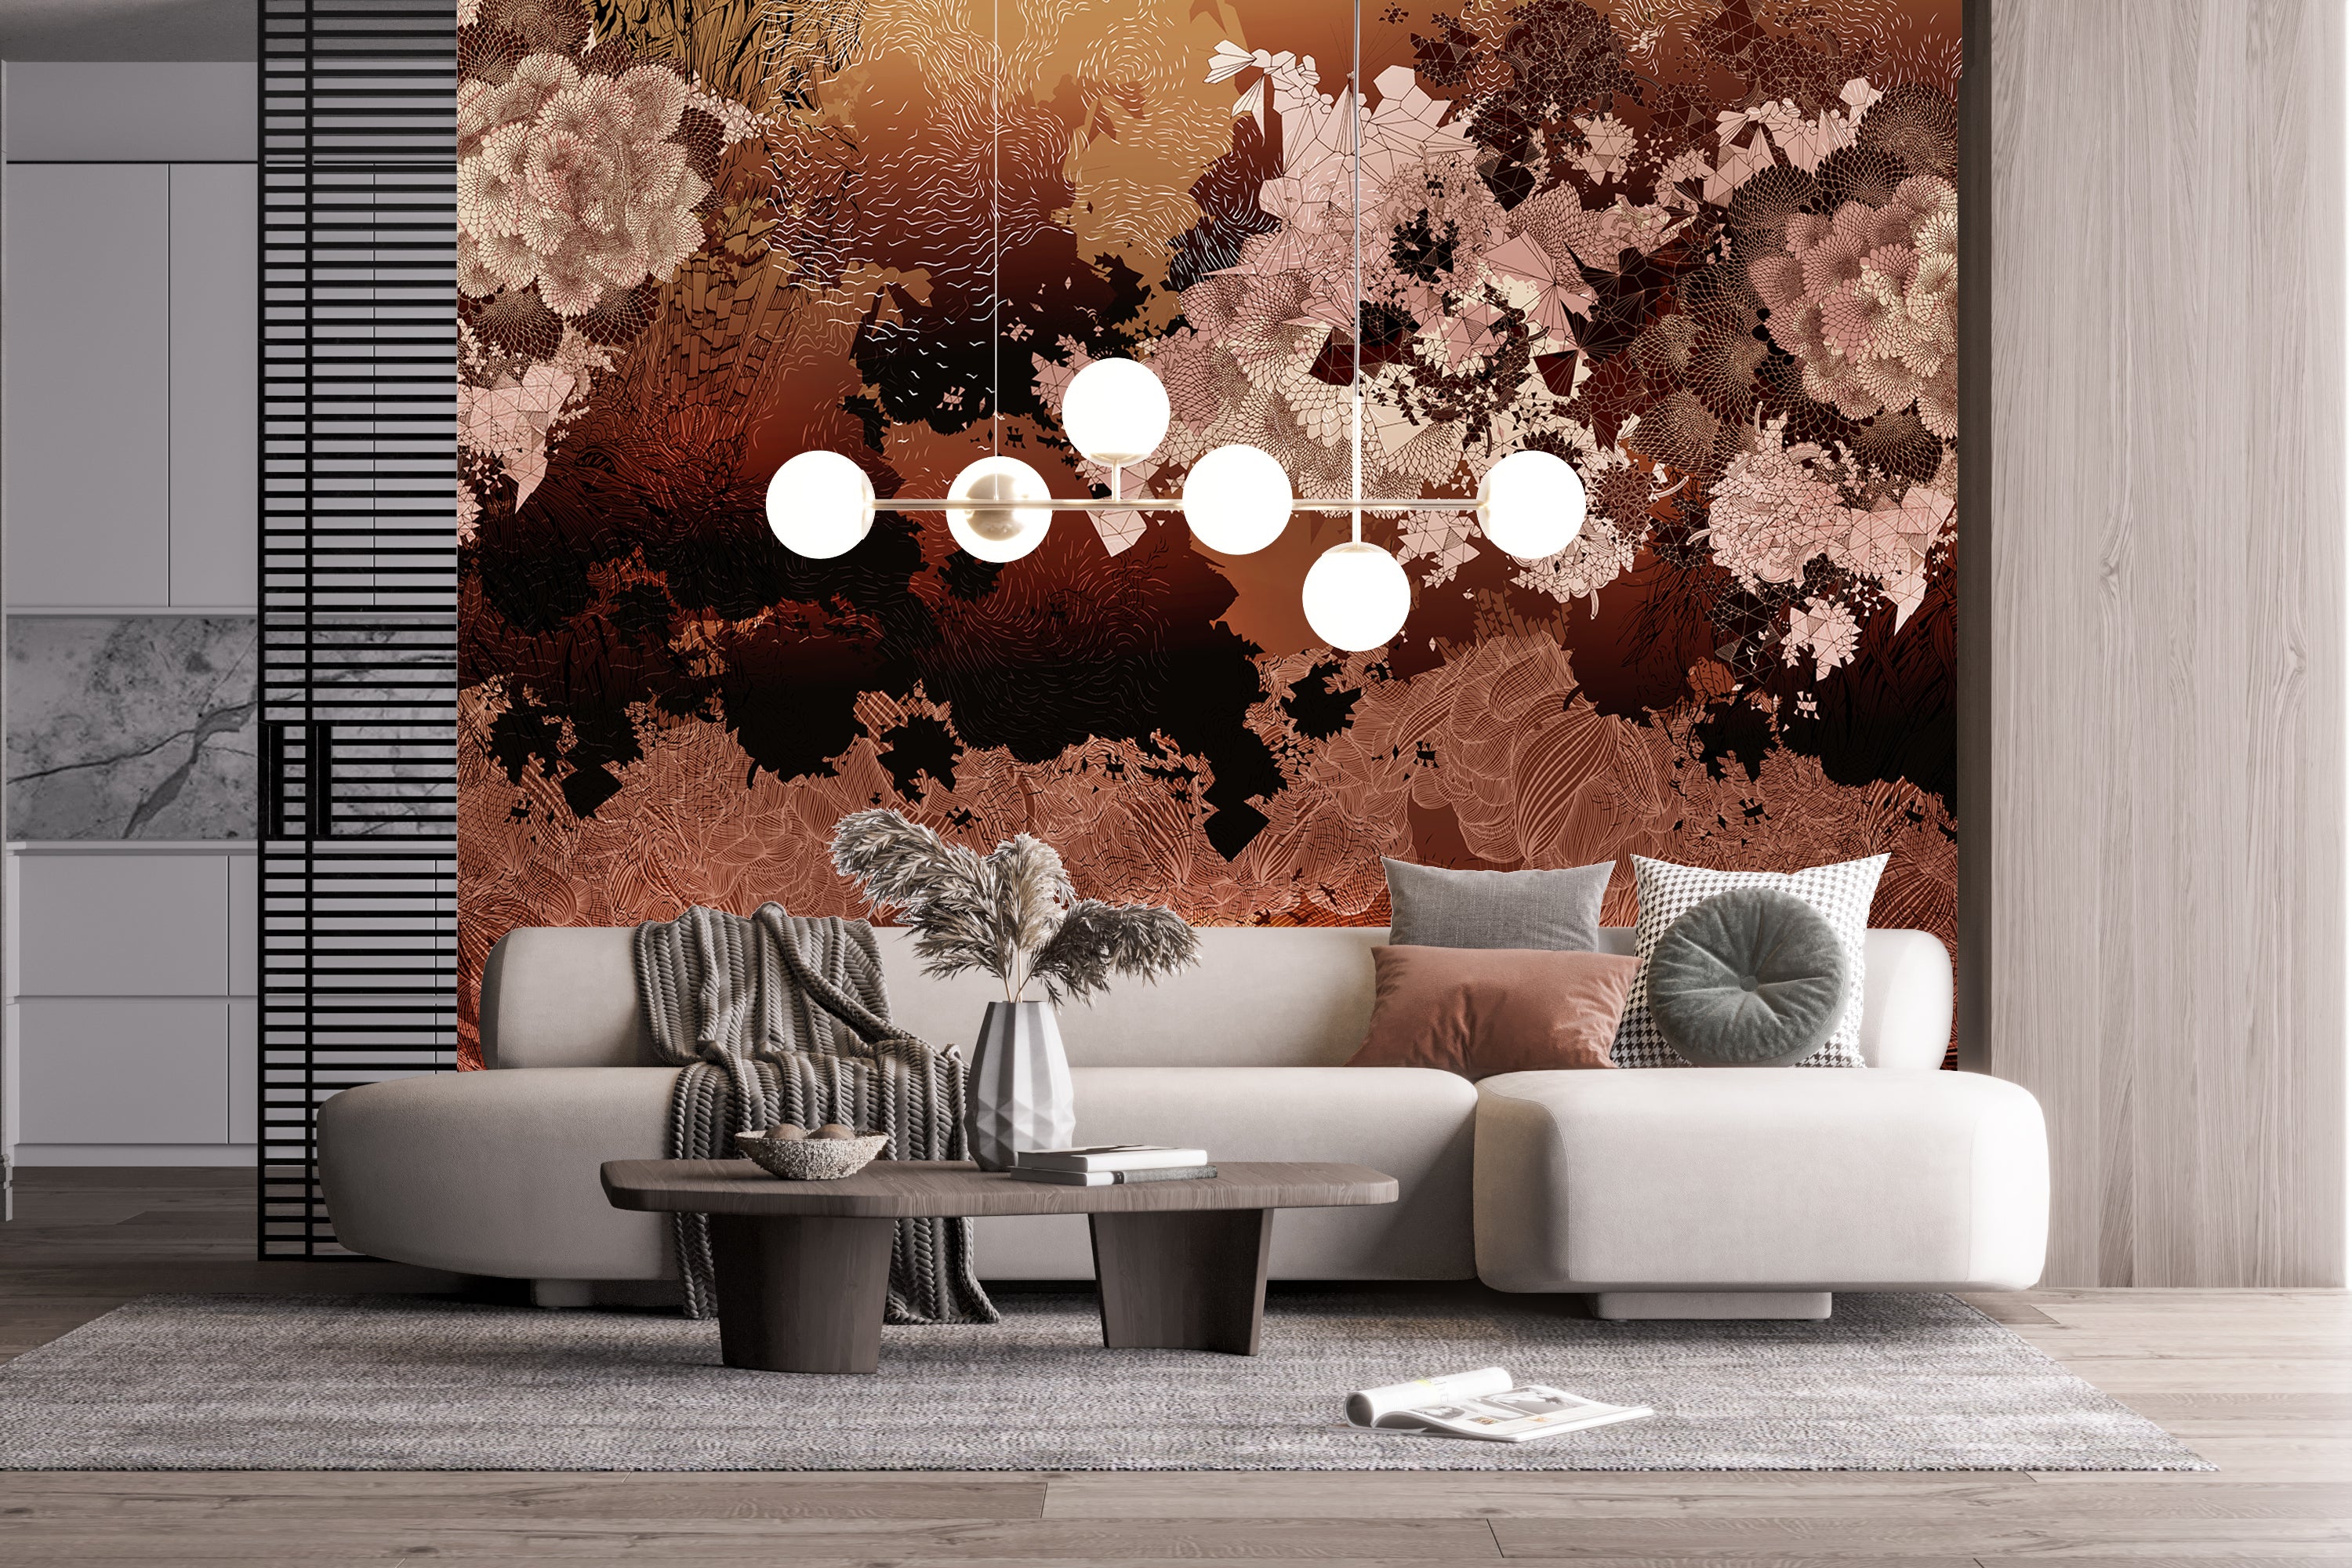 Mural wallpaper in situ in deep reds and oranges with geometric floral design